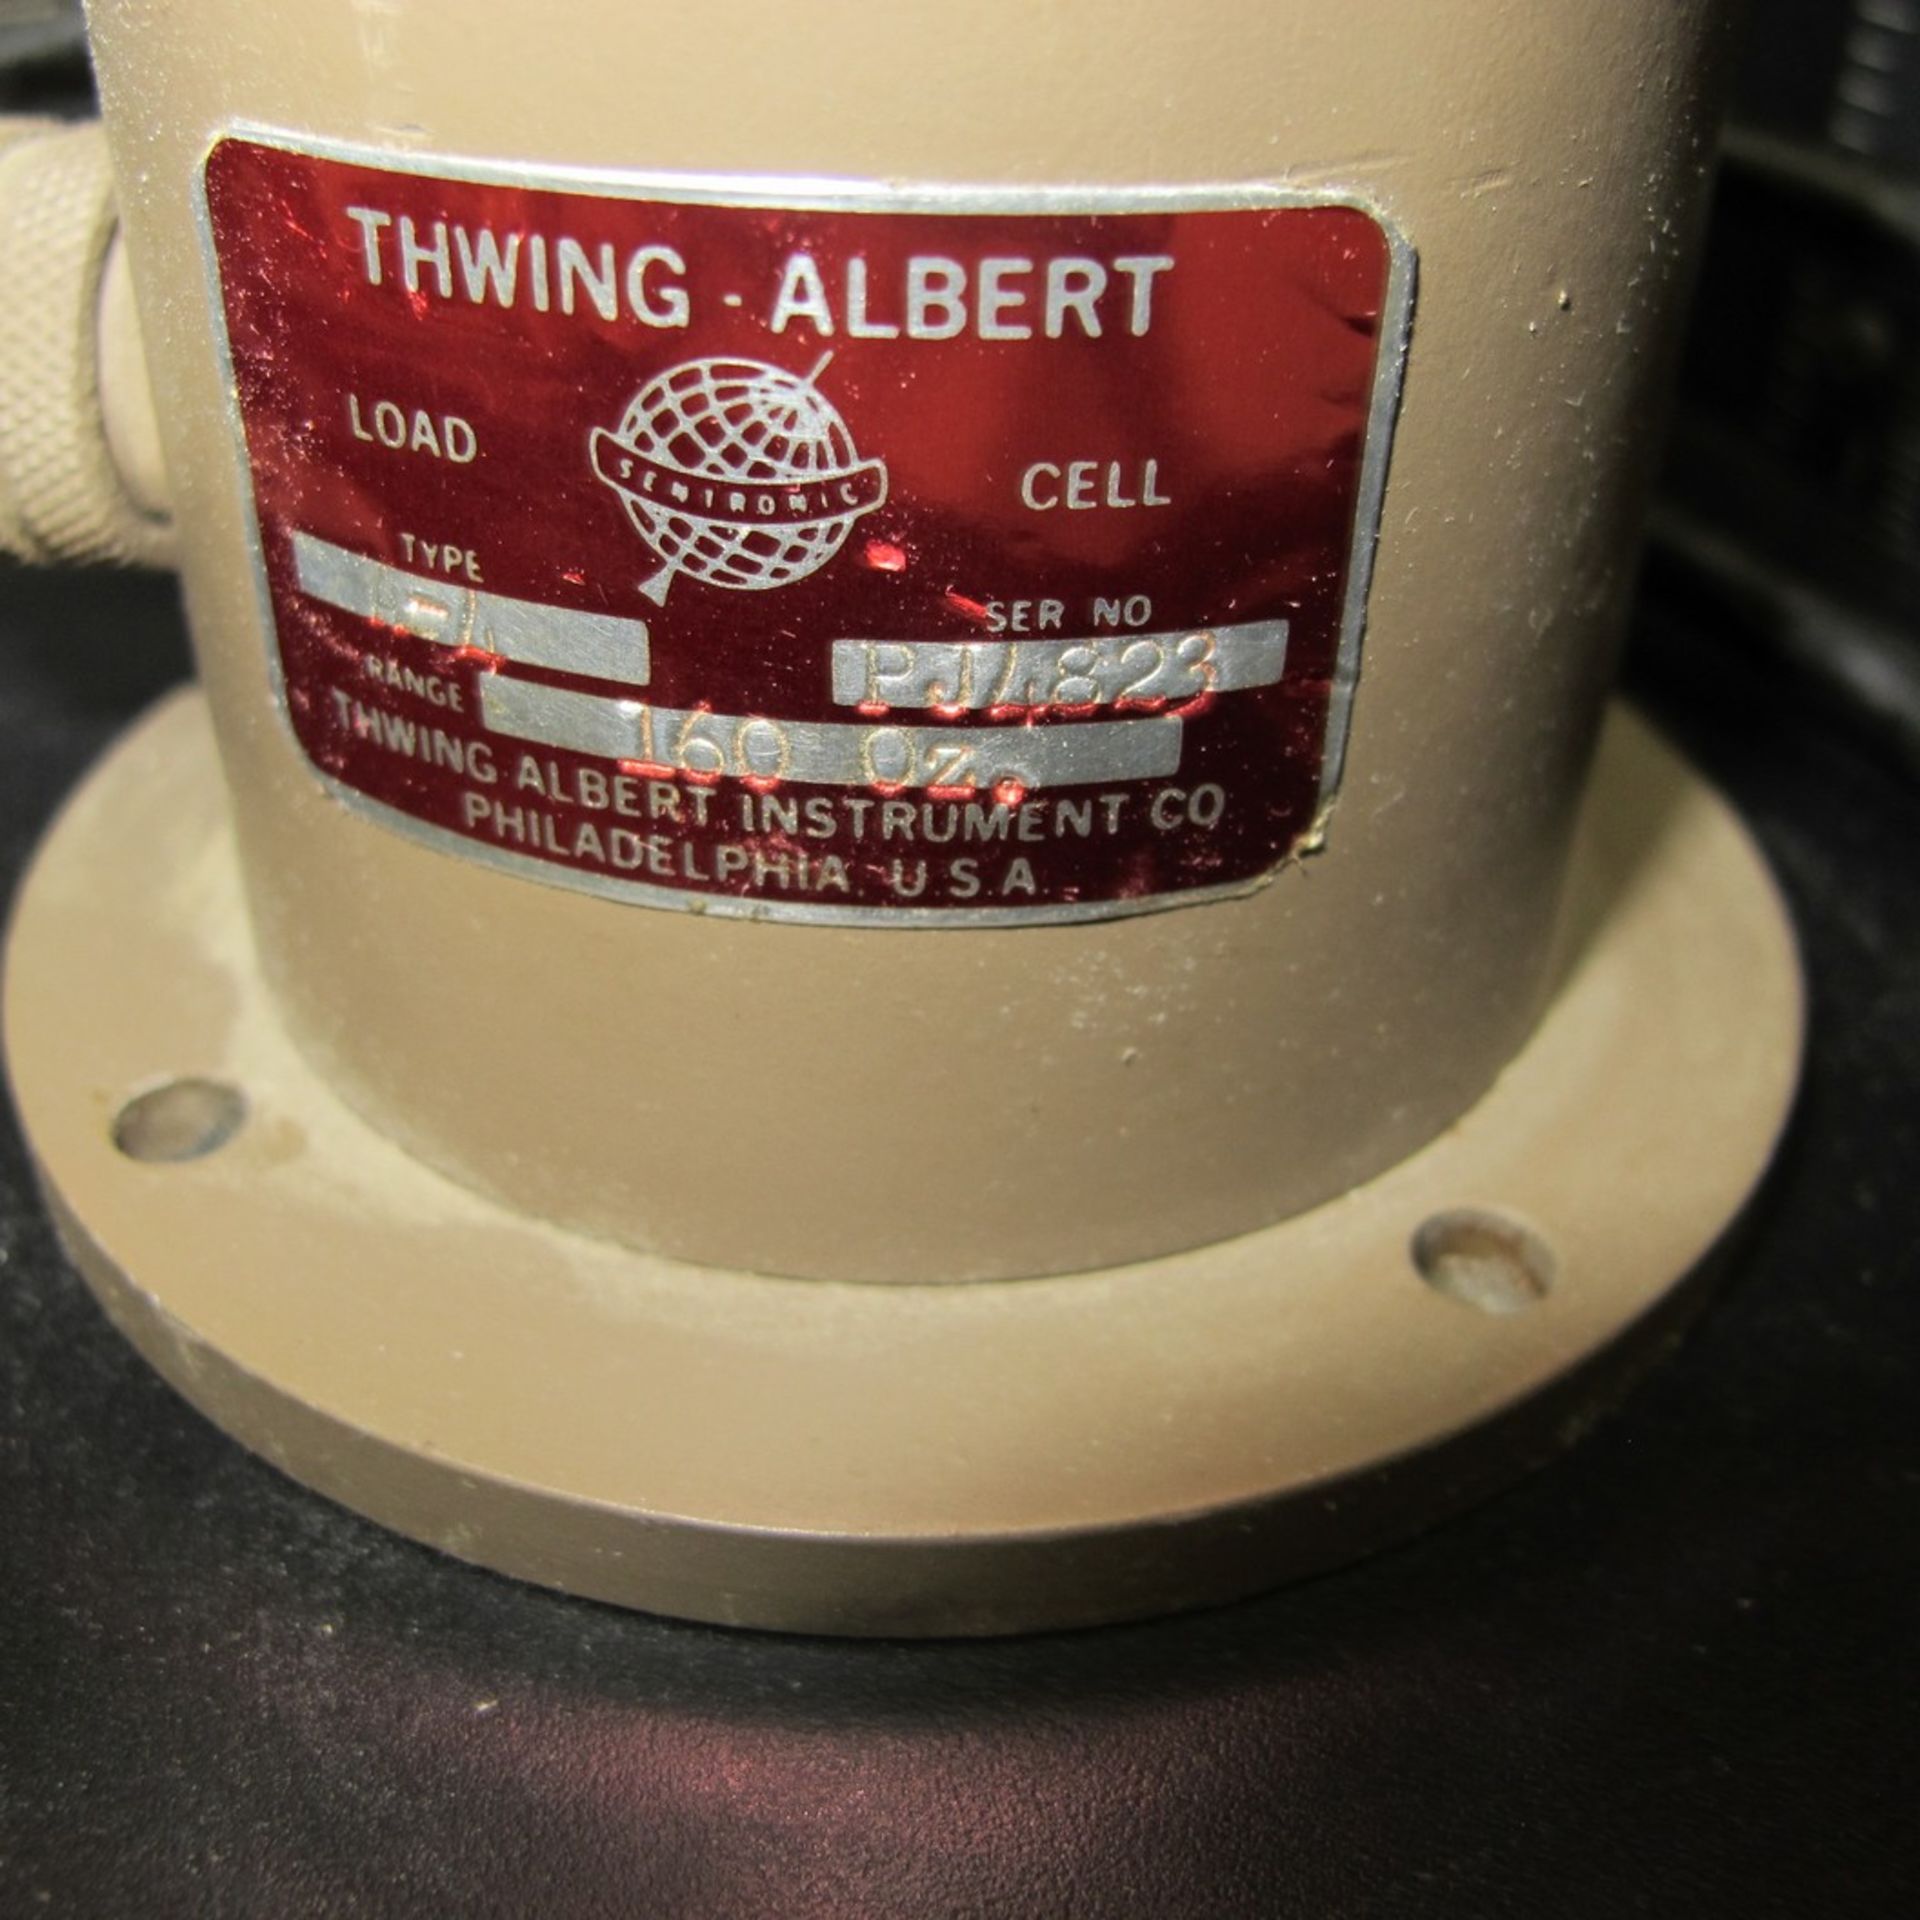 MESSMER INSTRUMENTS LTD. MODEL 4152000025 DIGITAL SCALE W/ THWING ALBERT LOAD CELL (LAB) - Image 5 of 5